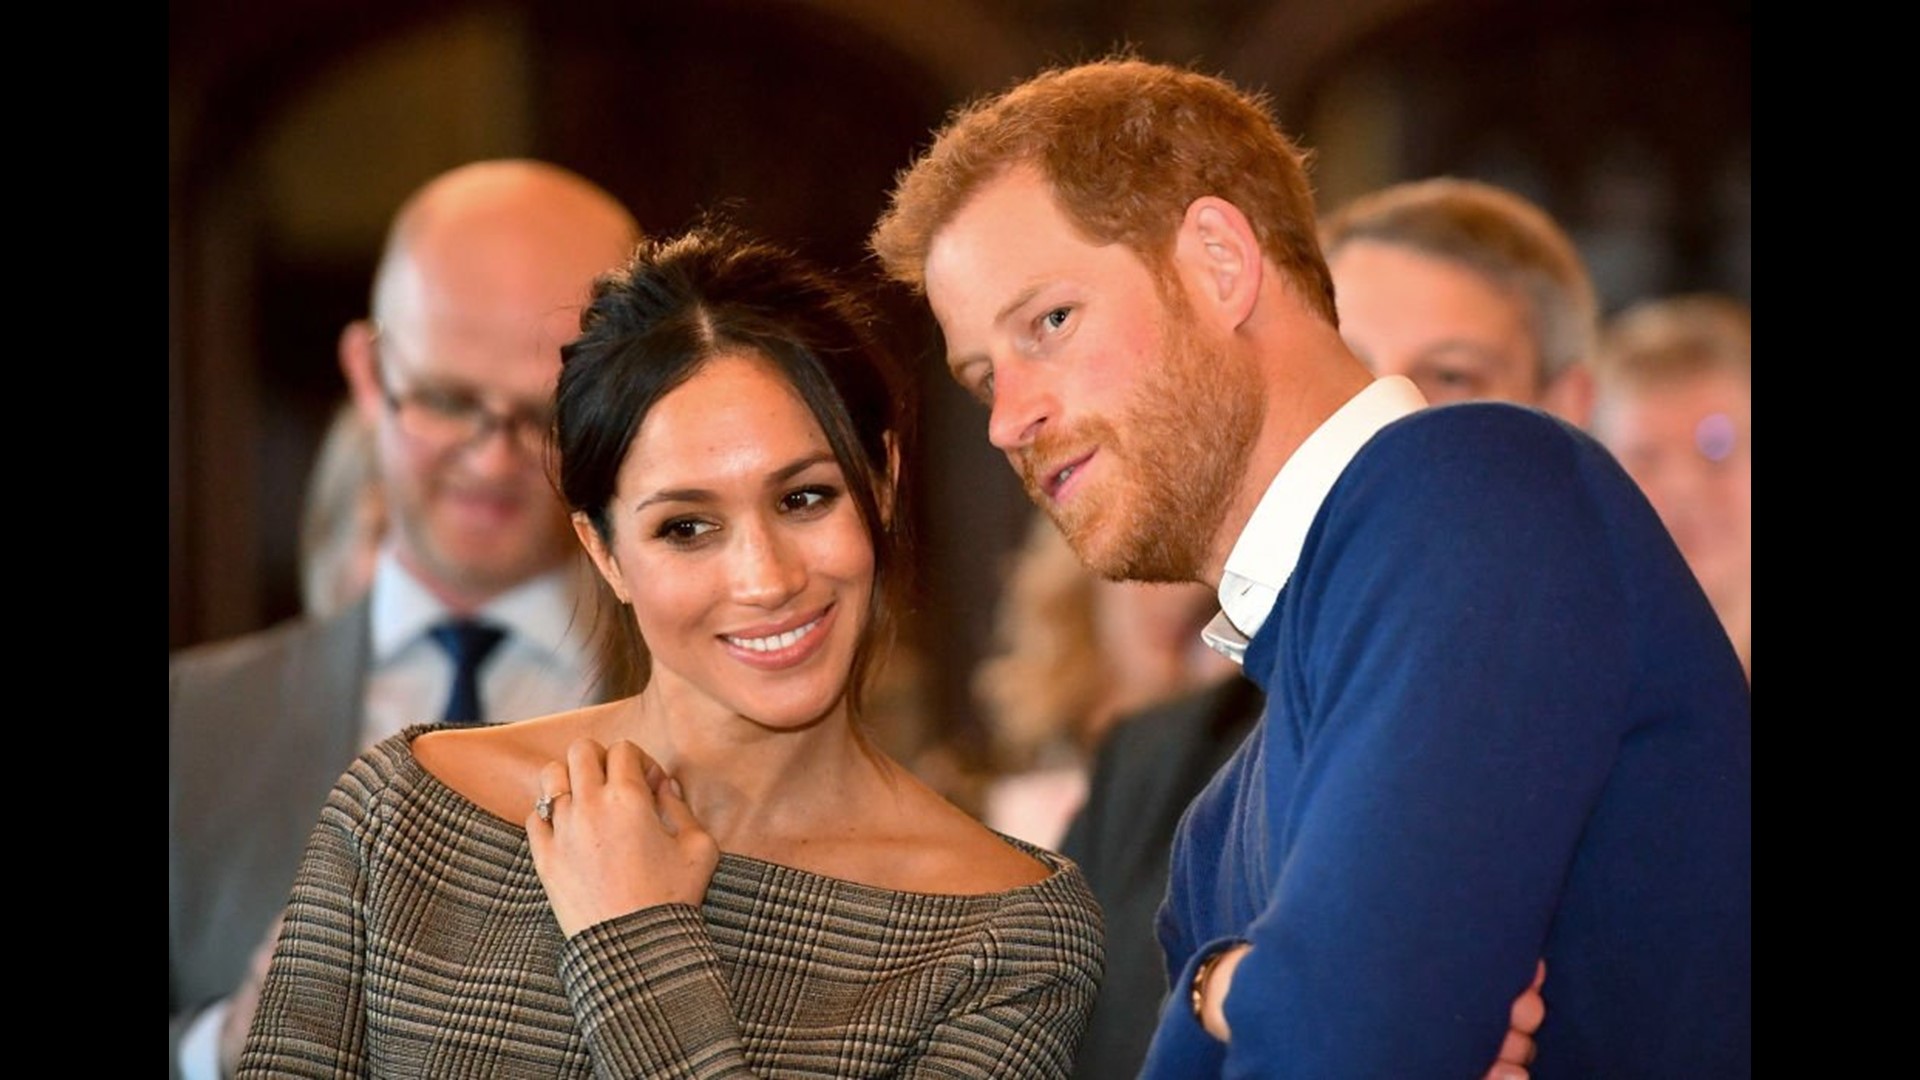 Buckingham Palace confirmed Friday that Prince Harry and his wife, Meghan, will not be returning to royal duties, and Harry will give up his honorary military titles